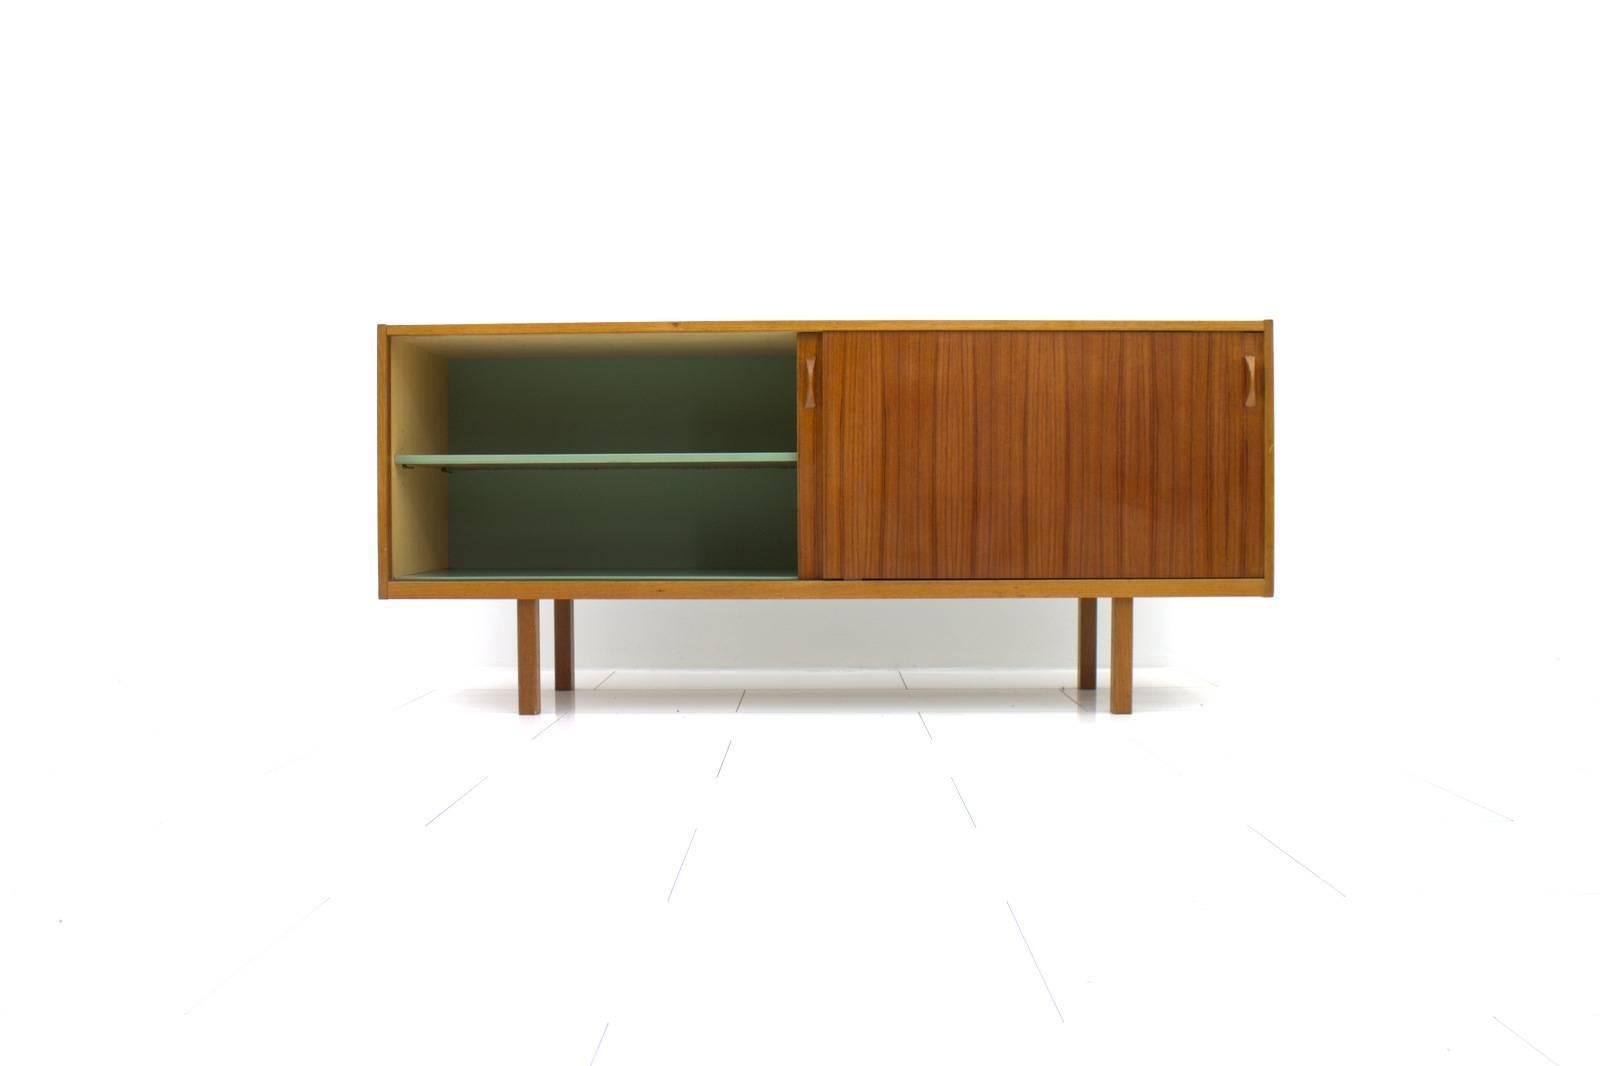 Teak Wood Sideboard from Sweden 1960s.
Two sliding doors and two drawers inside.

Good condition

Worldwide shipping.
